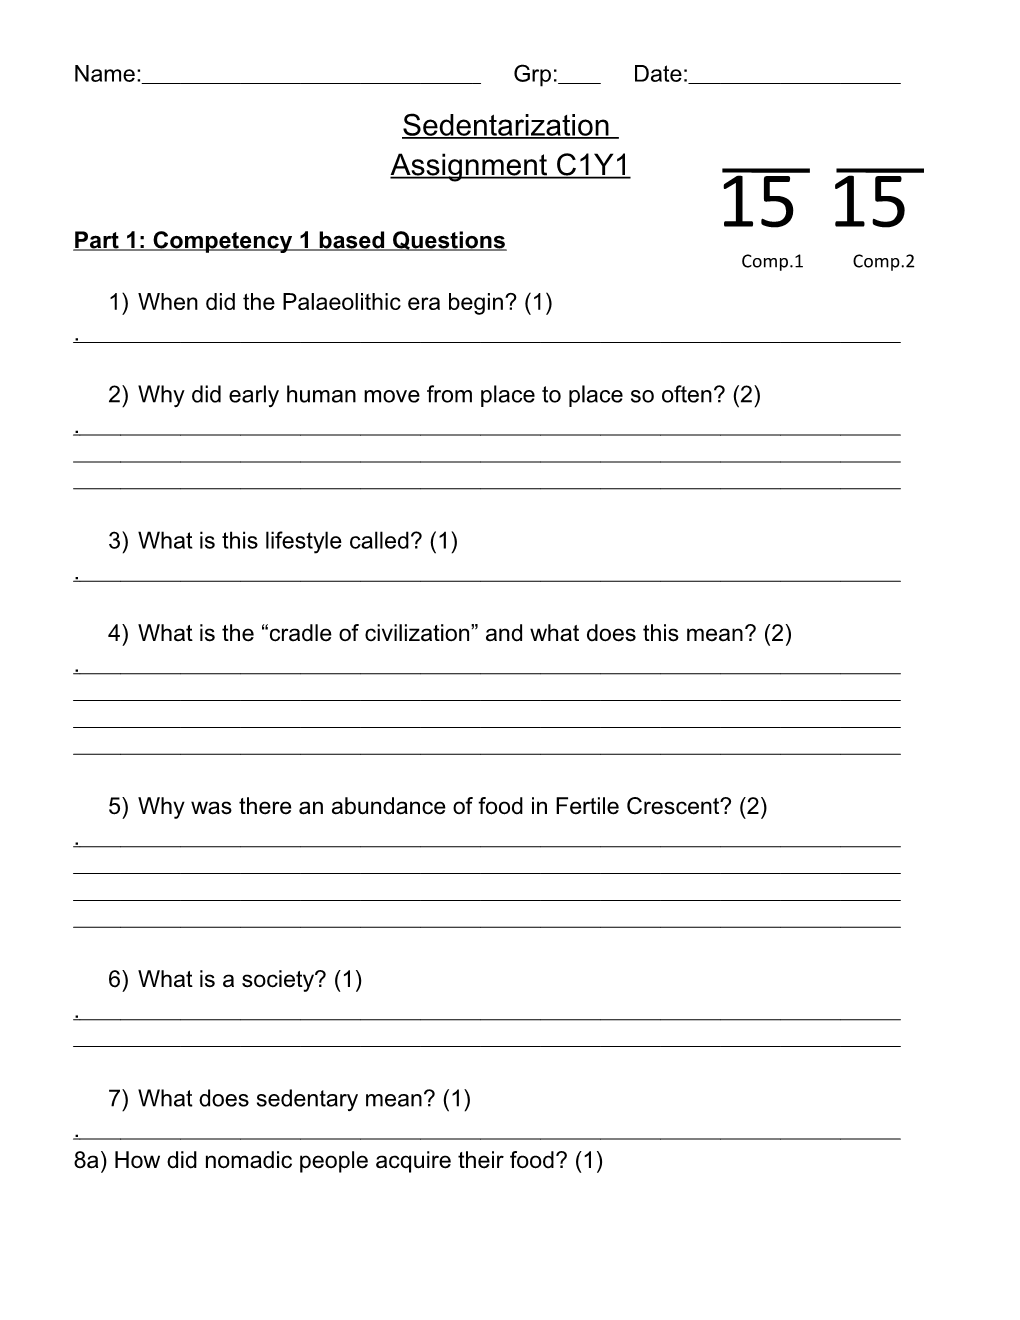 Part 1: Competency 1 Based Questions